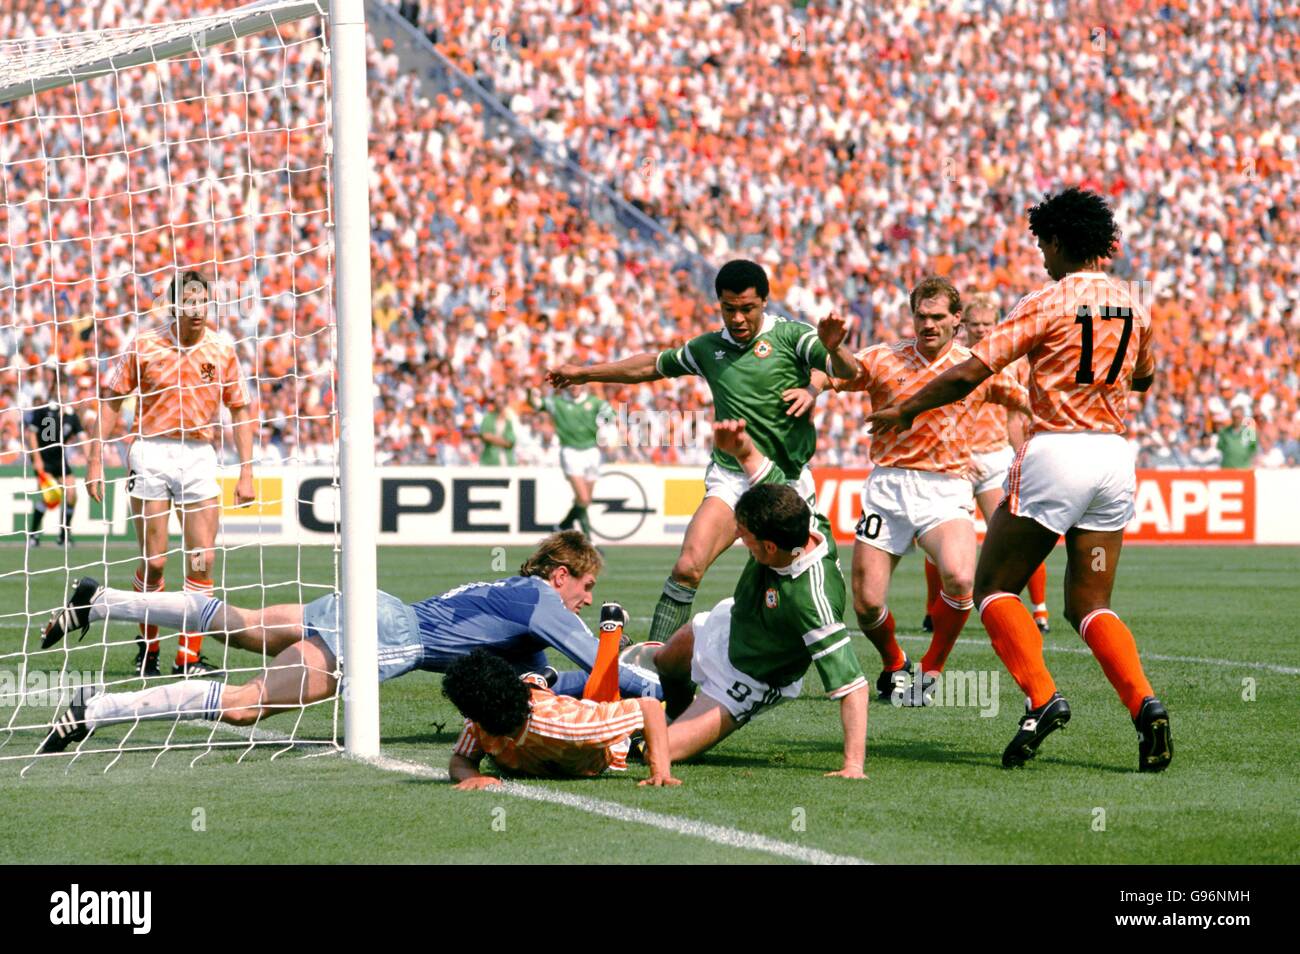 Holland goalkeeper Hans Van Breukelen (second left) dives to save at the feet of Ireland's Paul McGrath (centre) and John Aldridge (third right), watched by teammates Arnold Muhren (left), Jan Wouters (second right) and Frank Rijkaard (right) Stock Photo